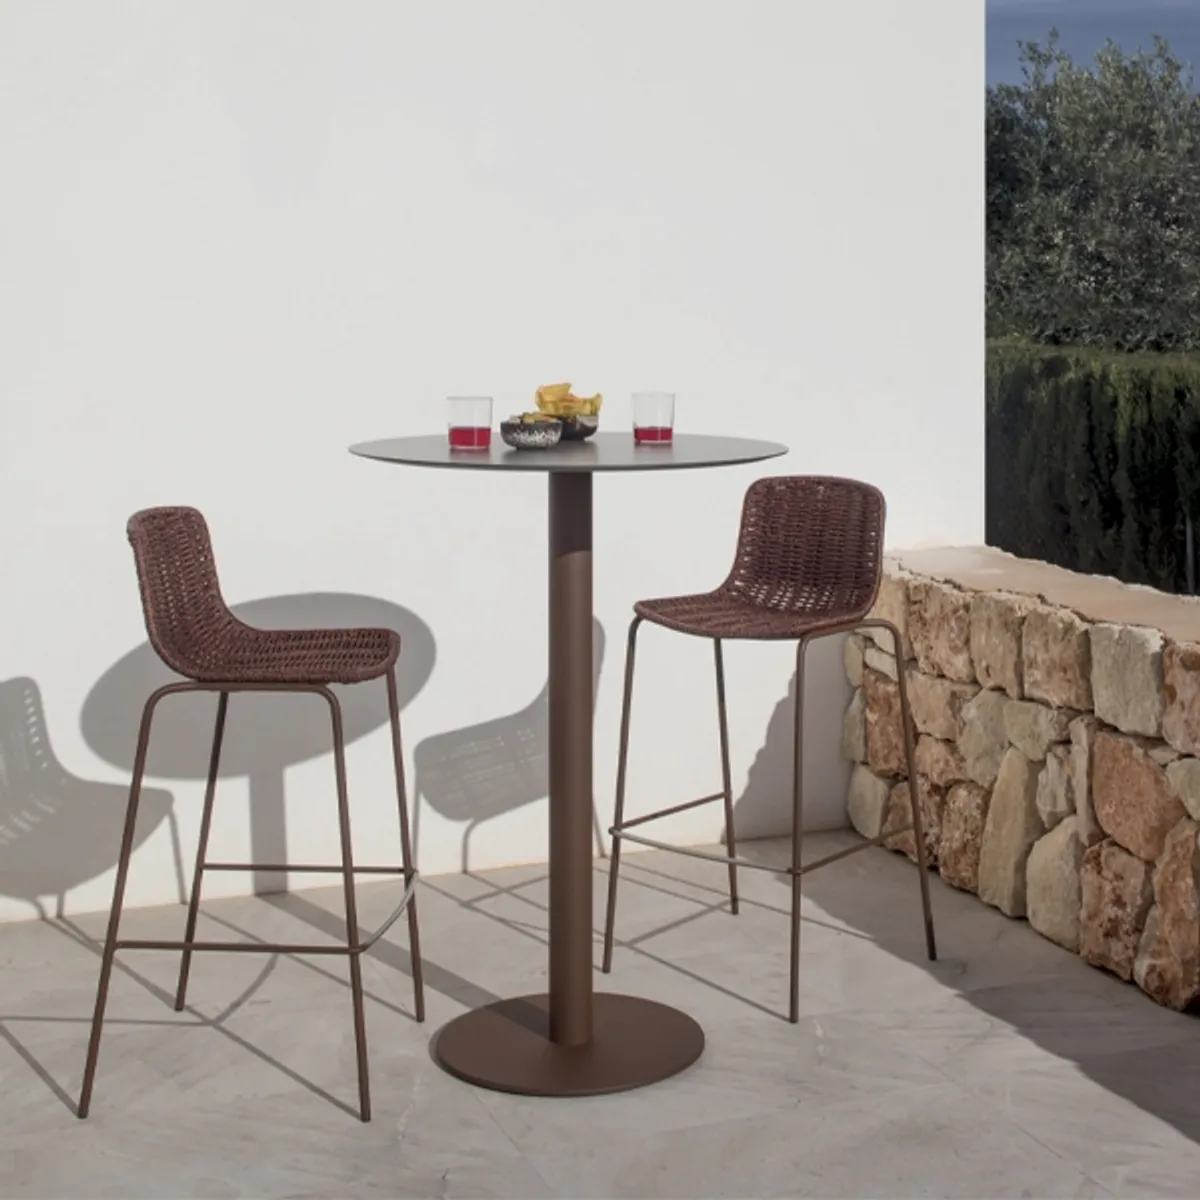 Lisette bar stool Inside Out Contracts2